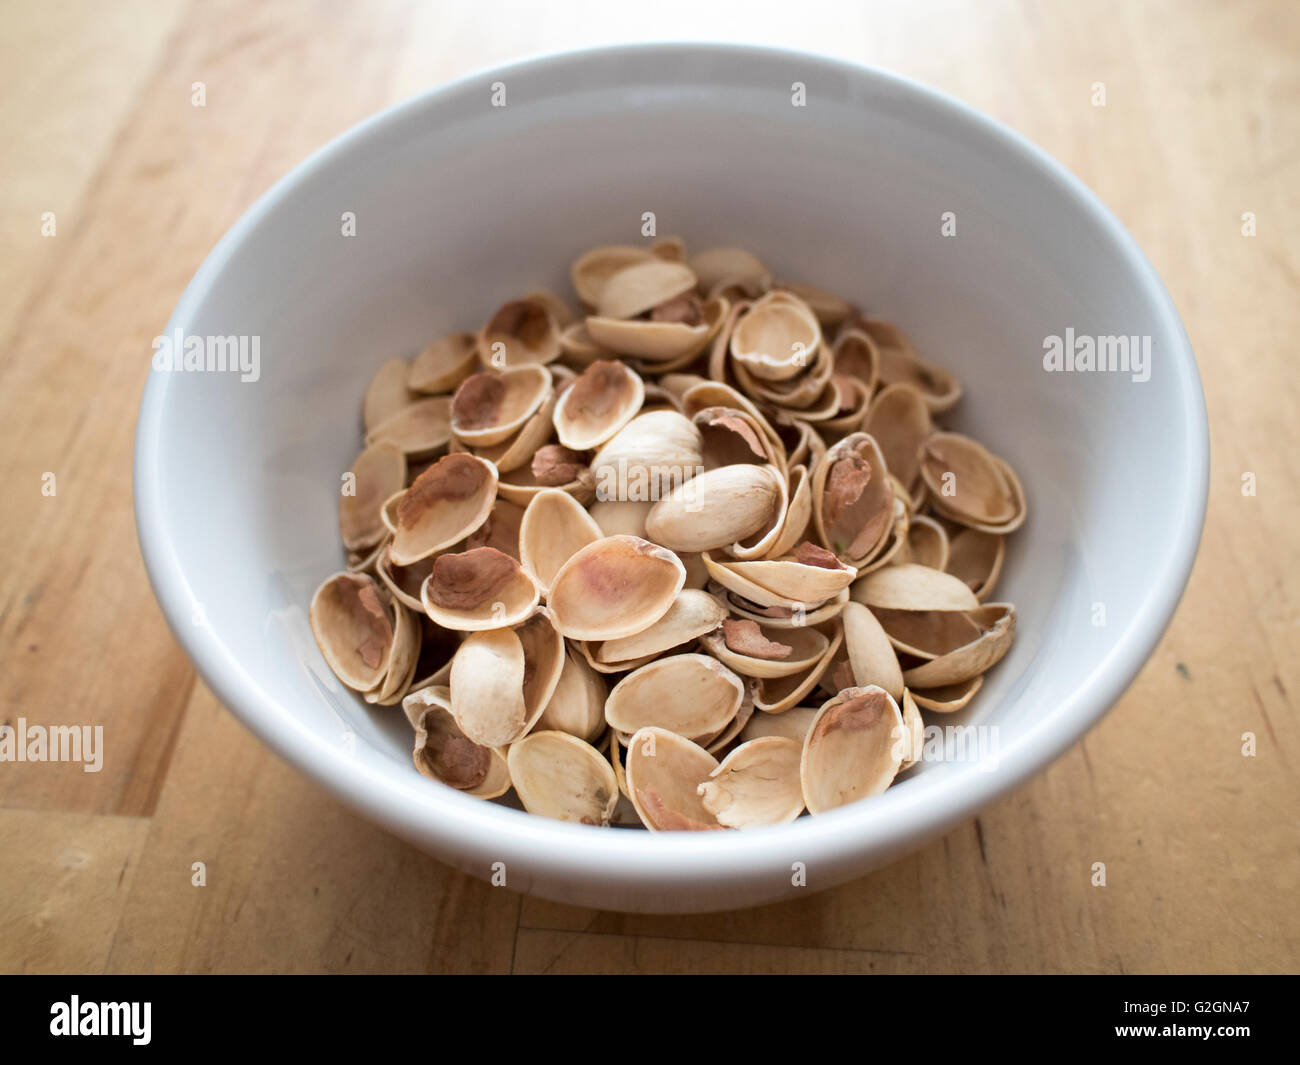 A bowl of pistachio shells in a white bowl. Stock Photo